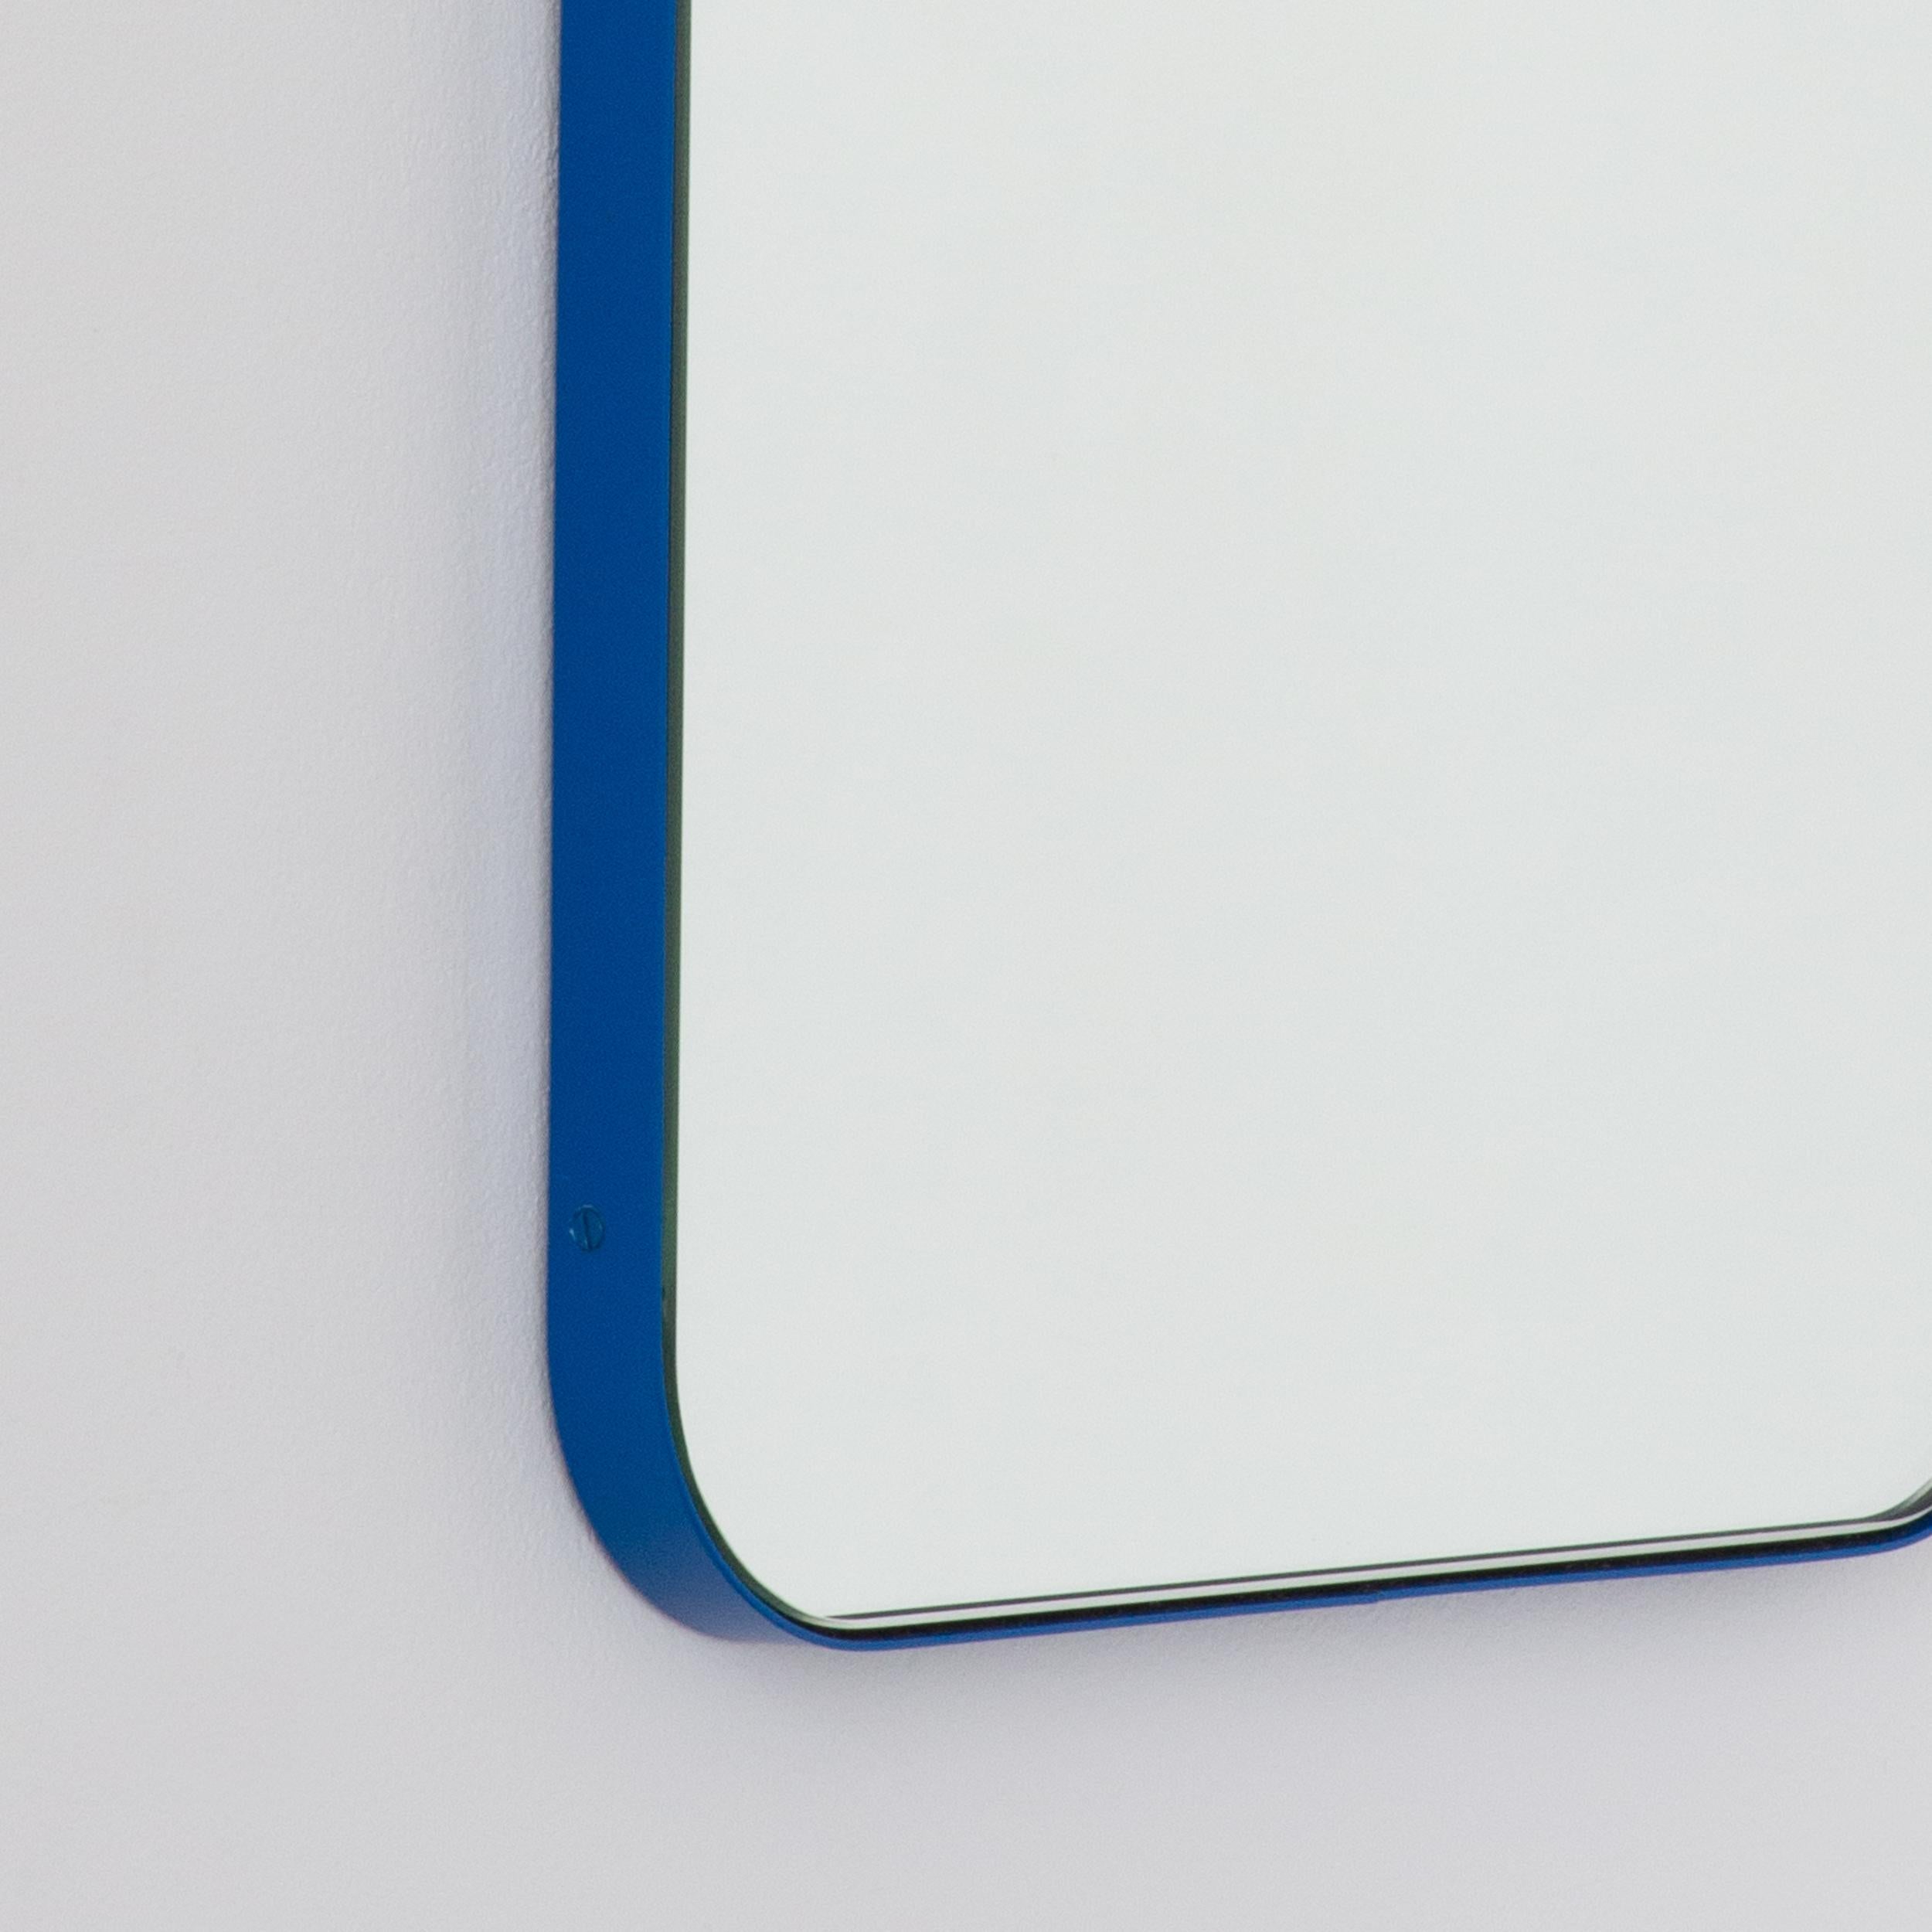 Powder-Coated Quadris Rectangular Minimalist Mirror with a Blue Frame, Large For Sale